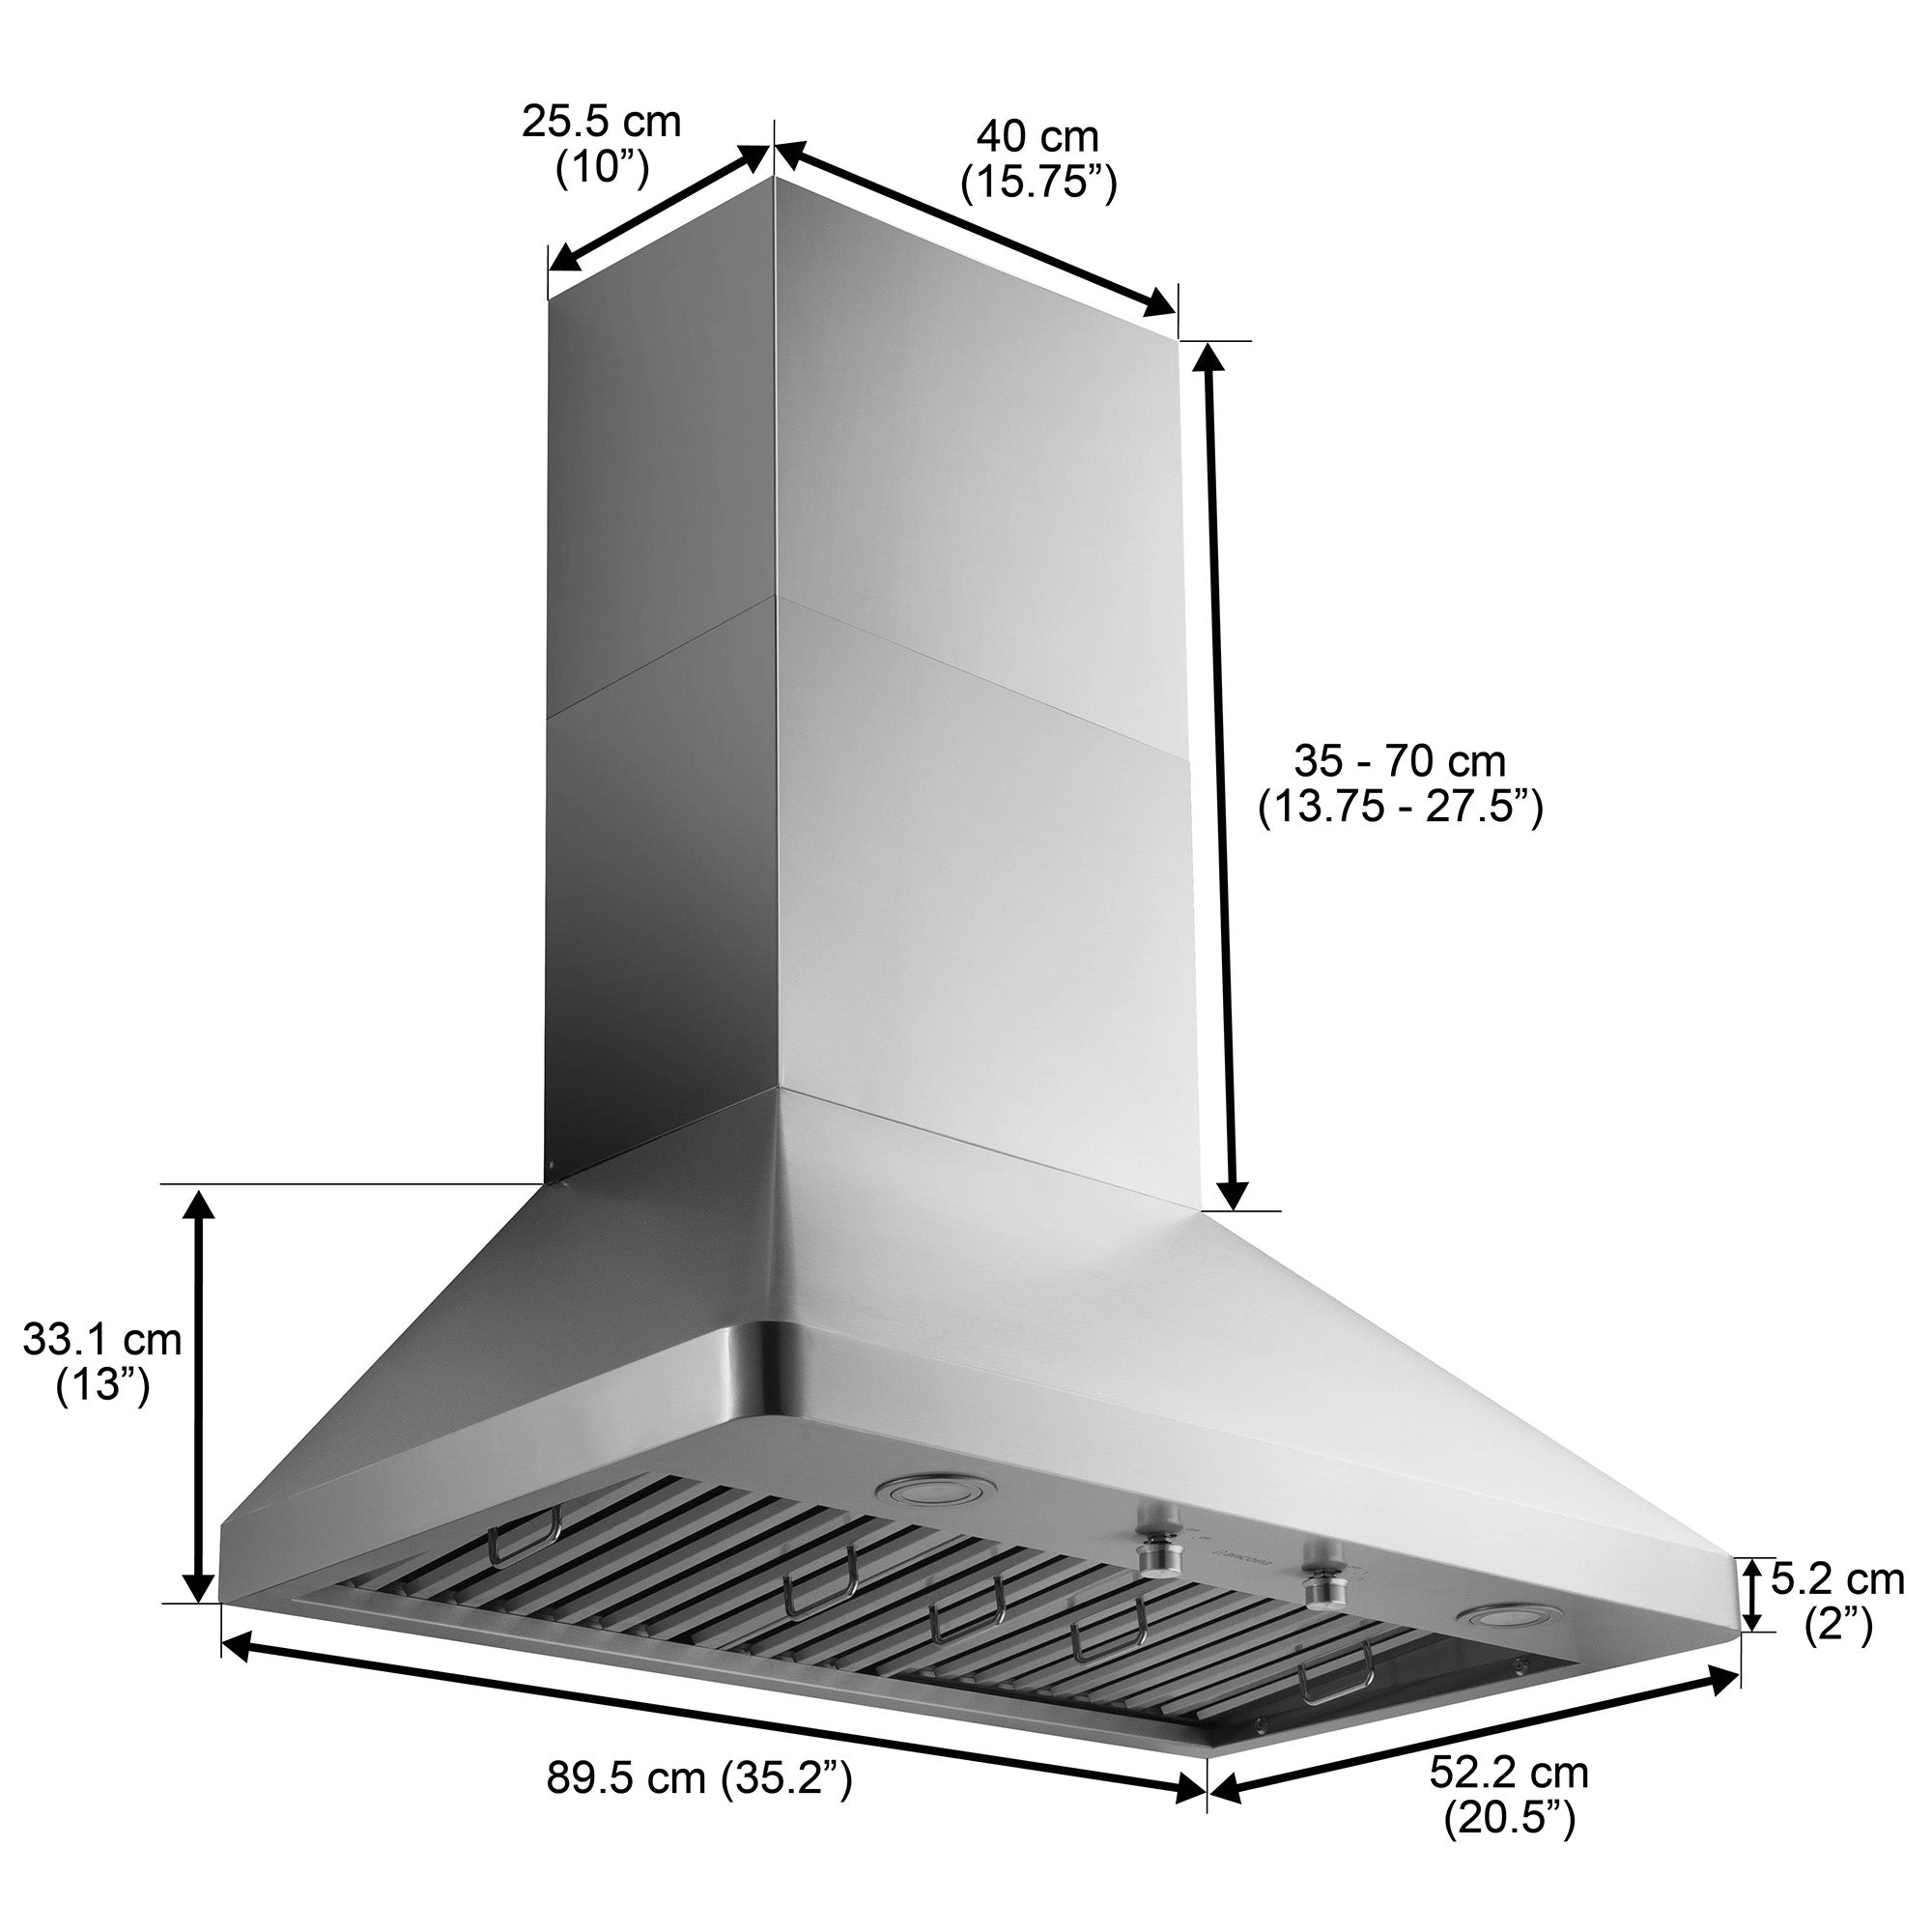 Ancona 36 in. Pro Series 1000CFM Pro Style Ducted Wall Mount Range Hood in Stainless Steel